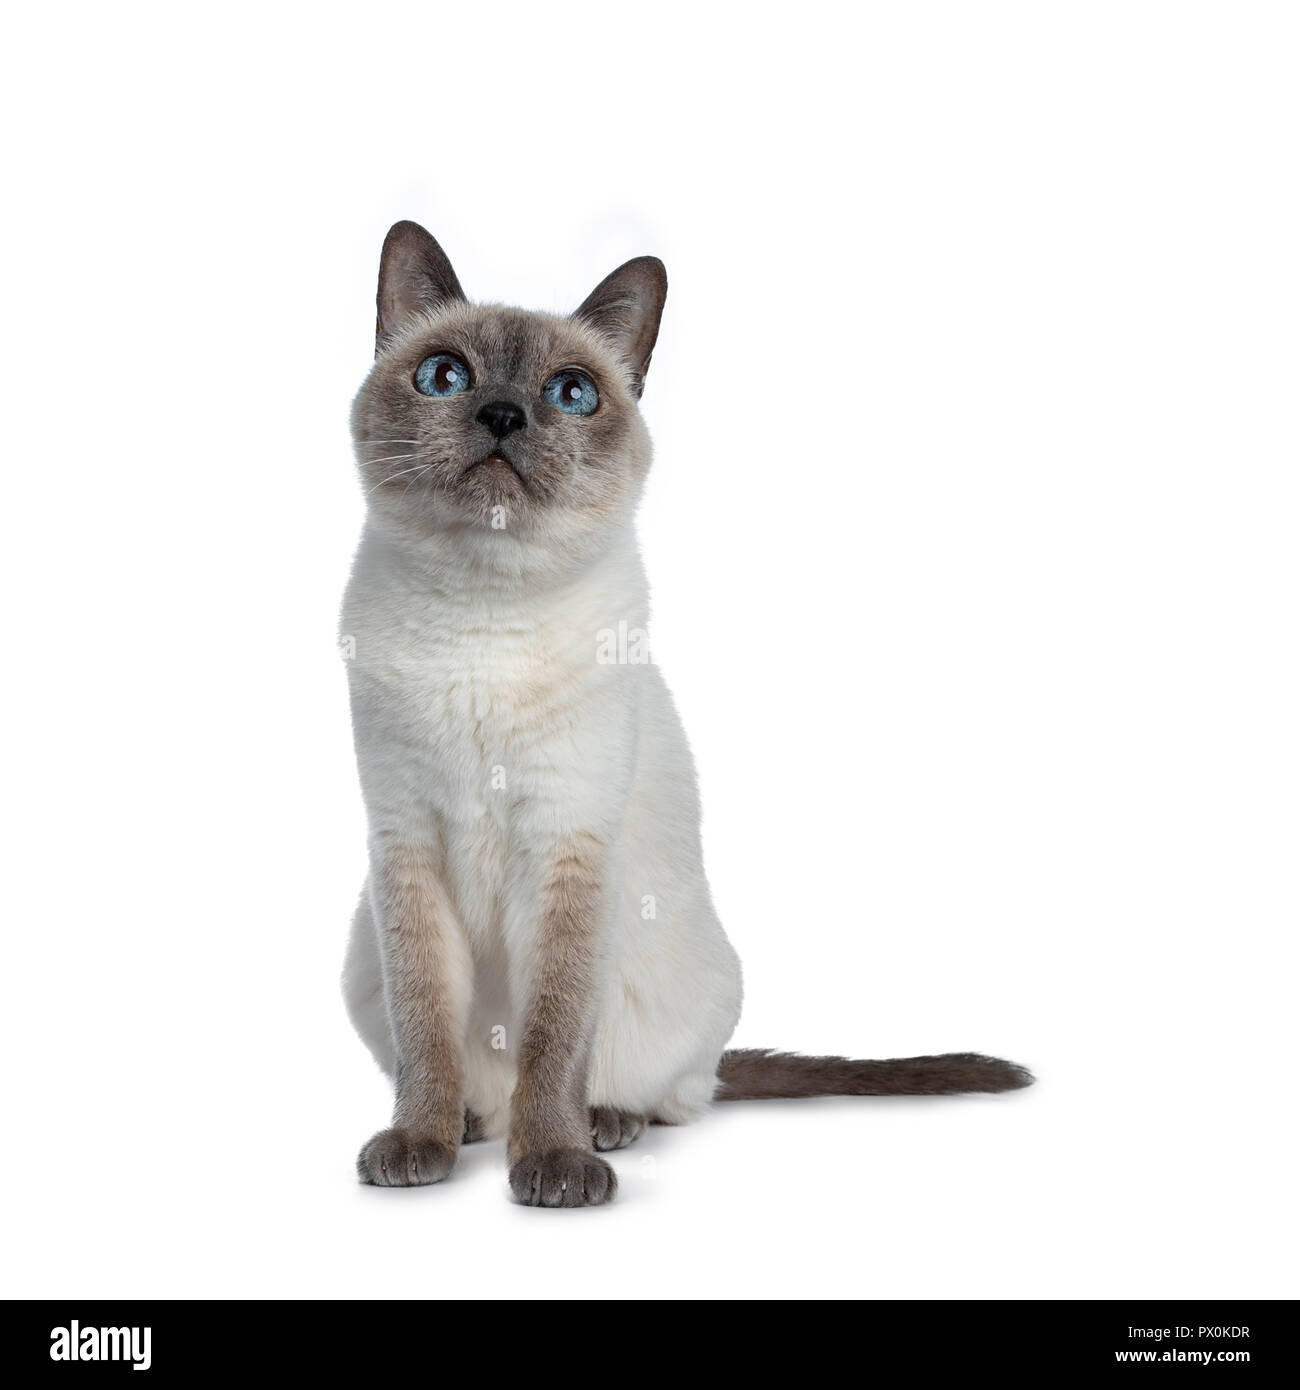 Senior blue point Thai cat sitting front view, looking up with blue wise eyes and tail beside body. Isolated on white background. Stock Photo